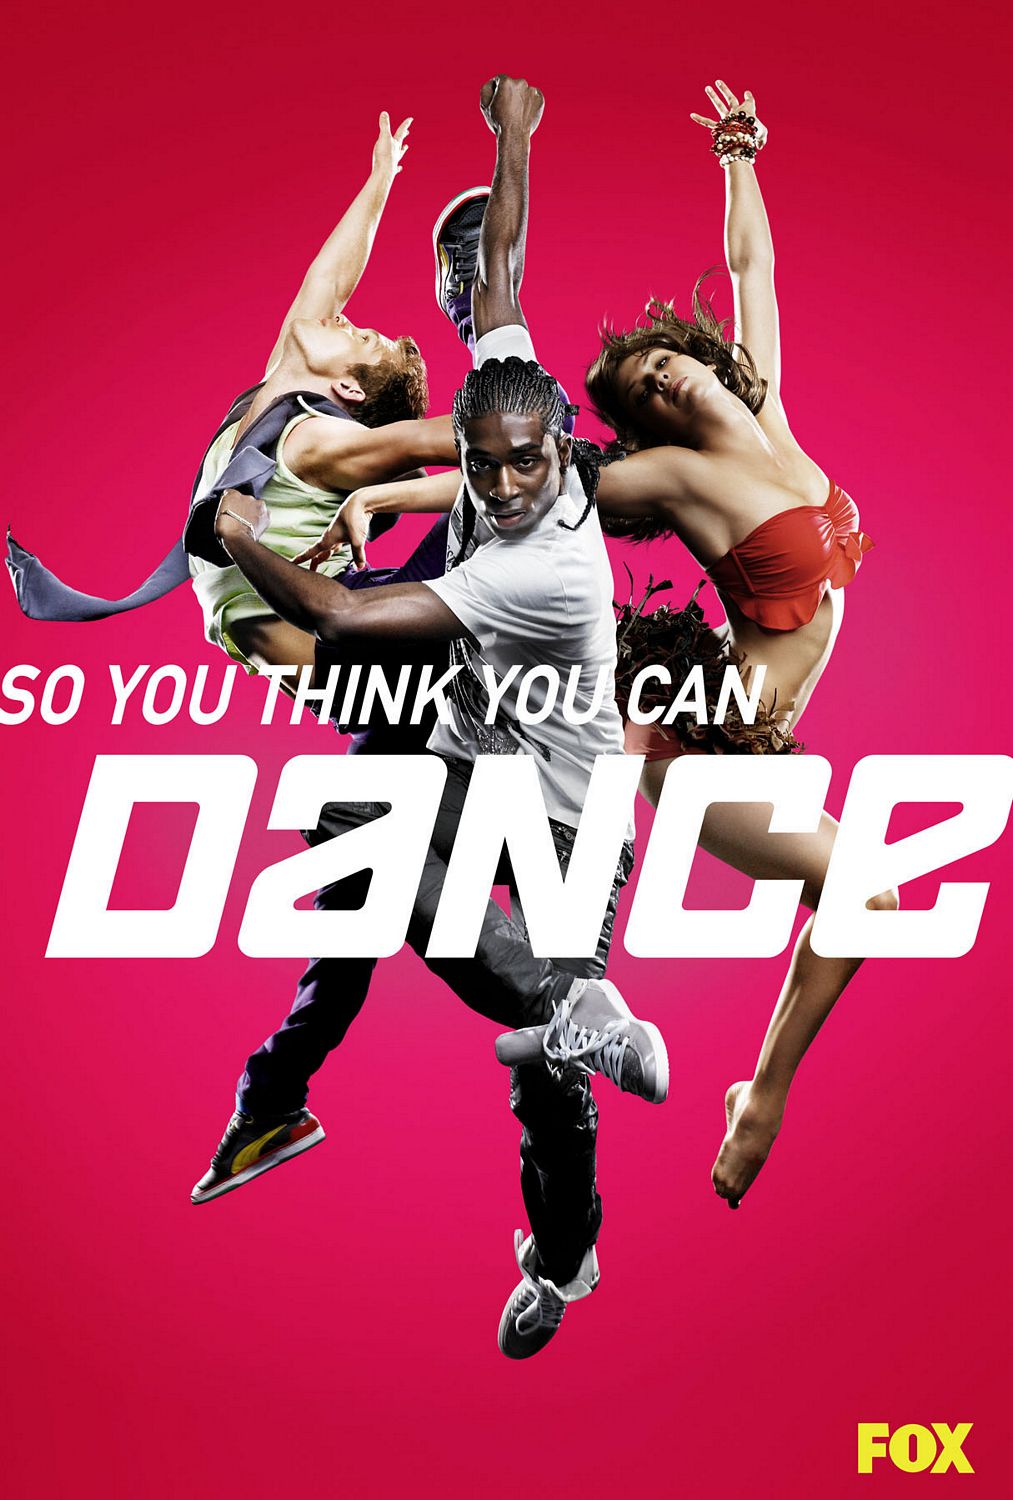 So You Think You Can Dance (23 of 32) Extra Large Movie Poster Image